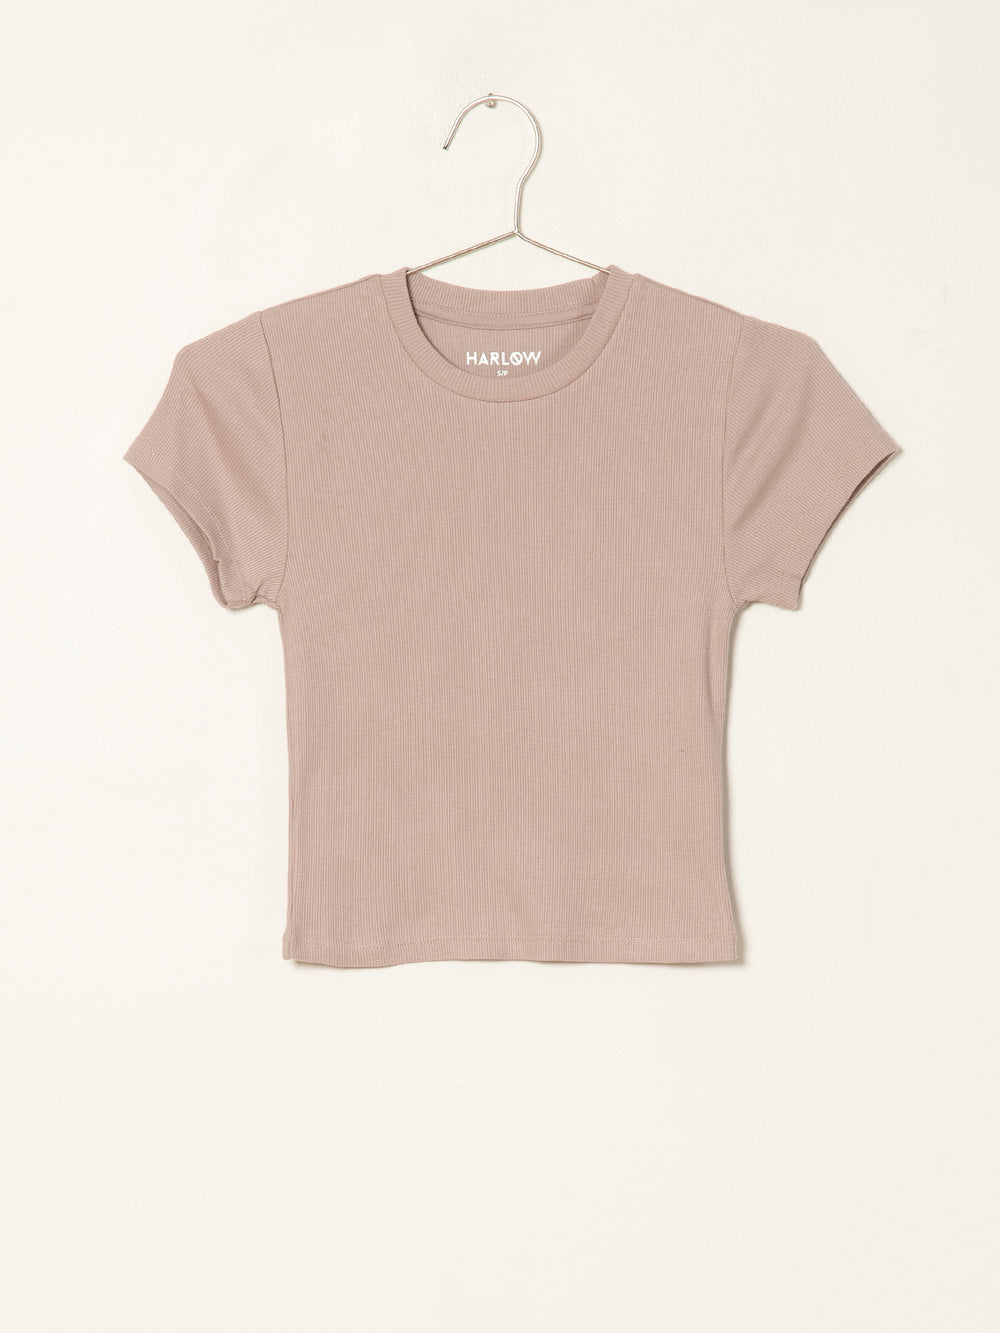 HARLOW RIBBED BABY TEE - CLEARANCE